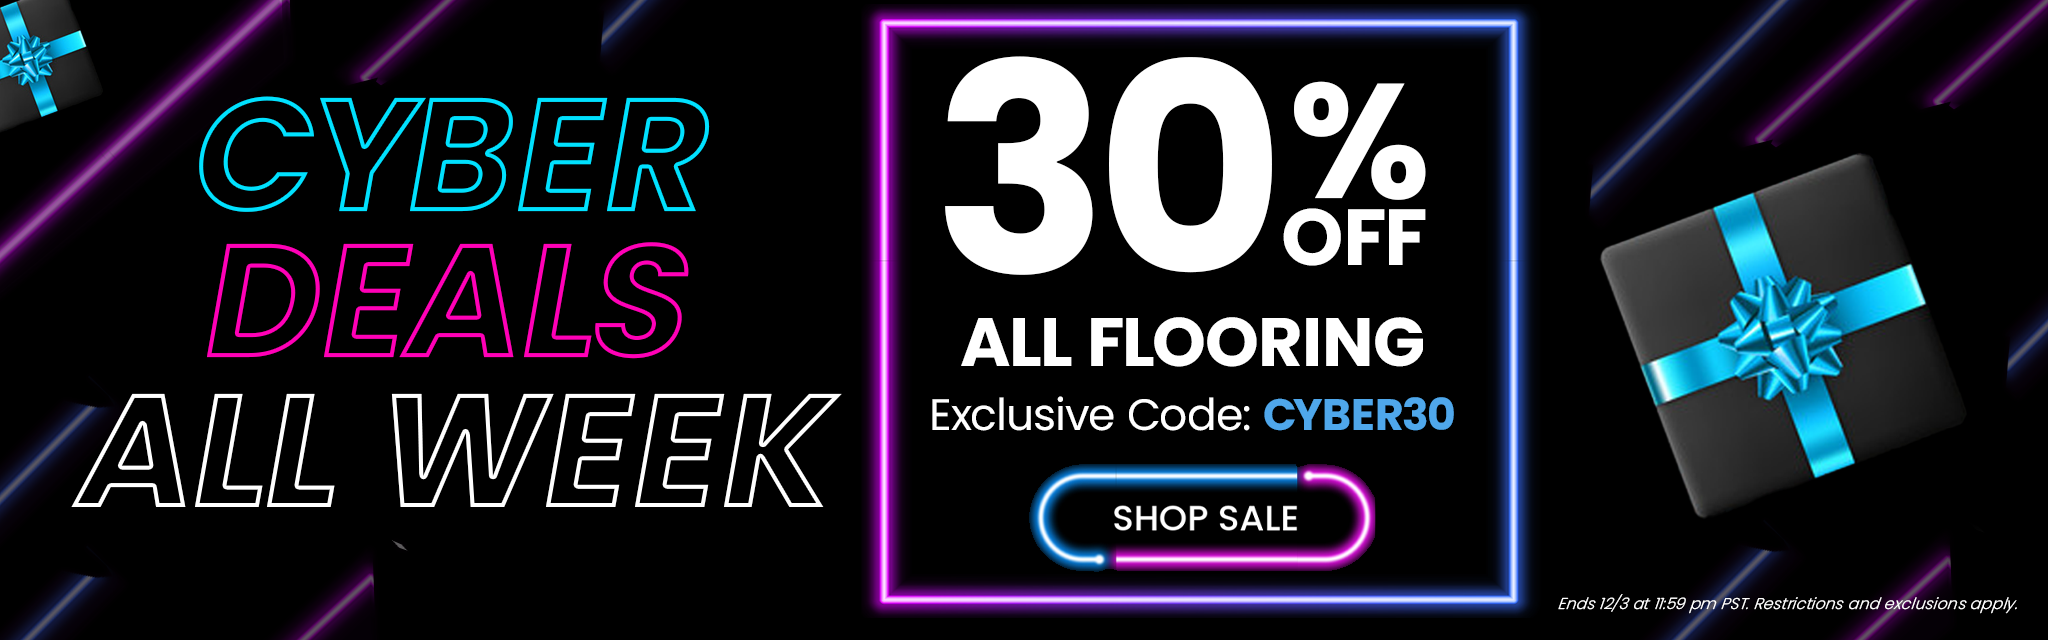 Cyber Deals All Week. 30% Off All Flooring. Exclusive Code: CYBER30. Shop Sale. Ends 12/3 at 11:59p.m. Restrictions and exclusions apply.